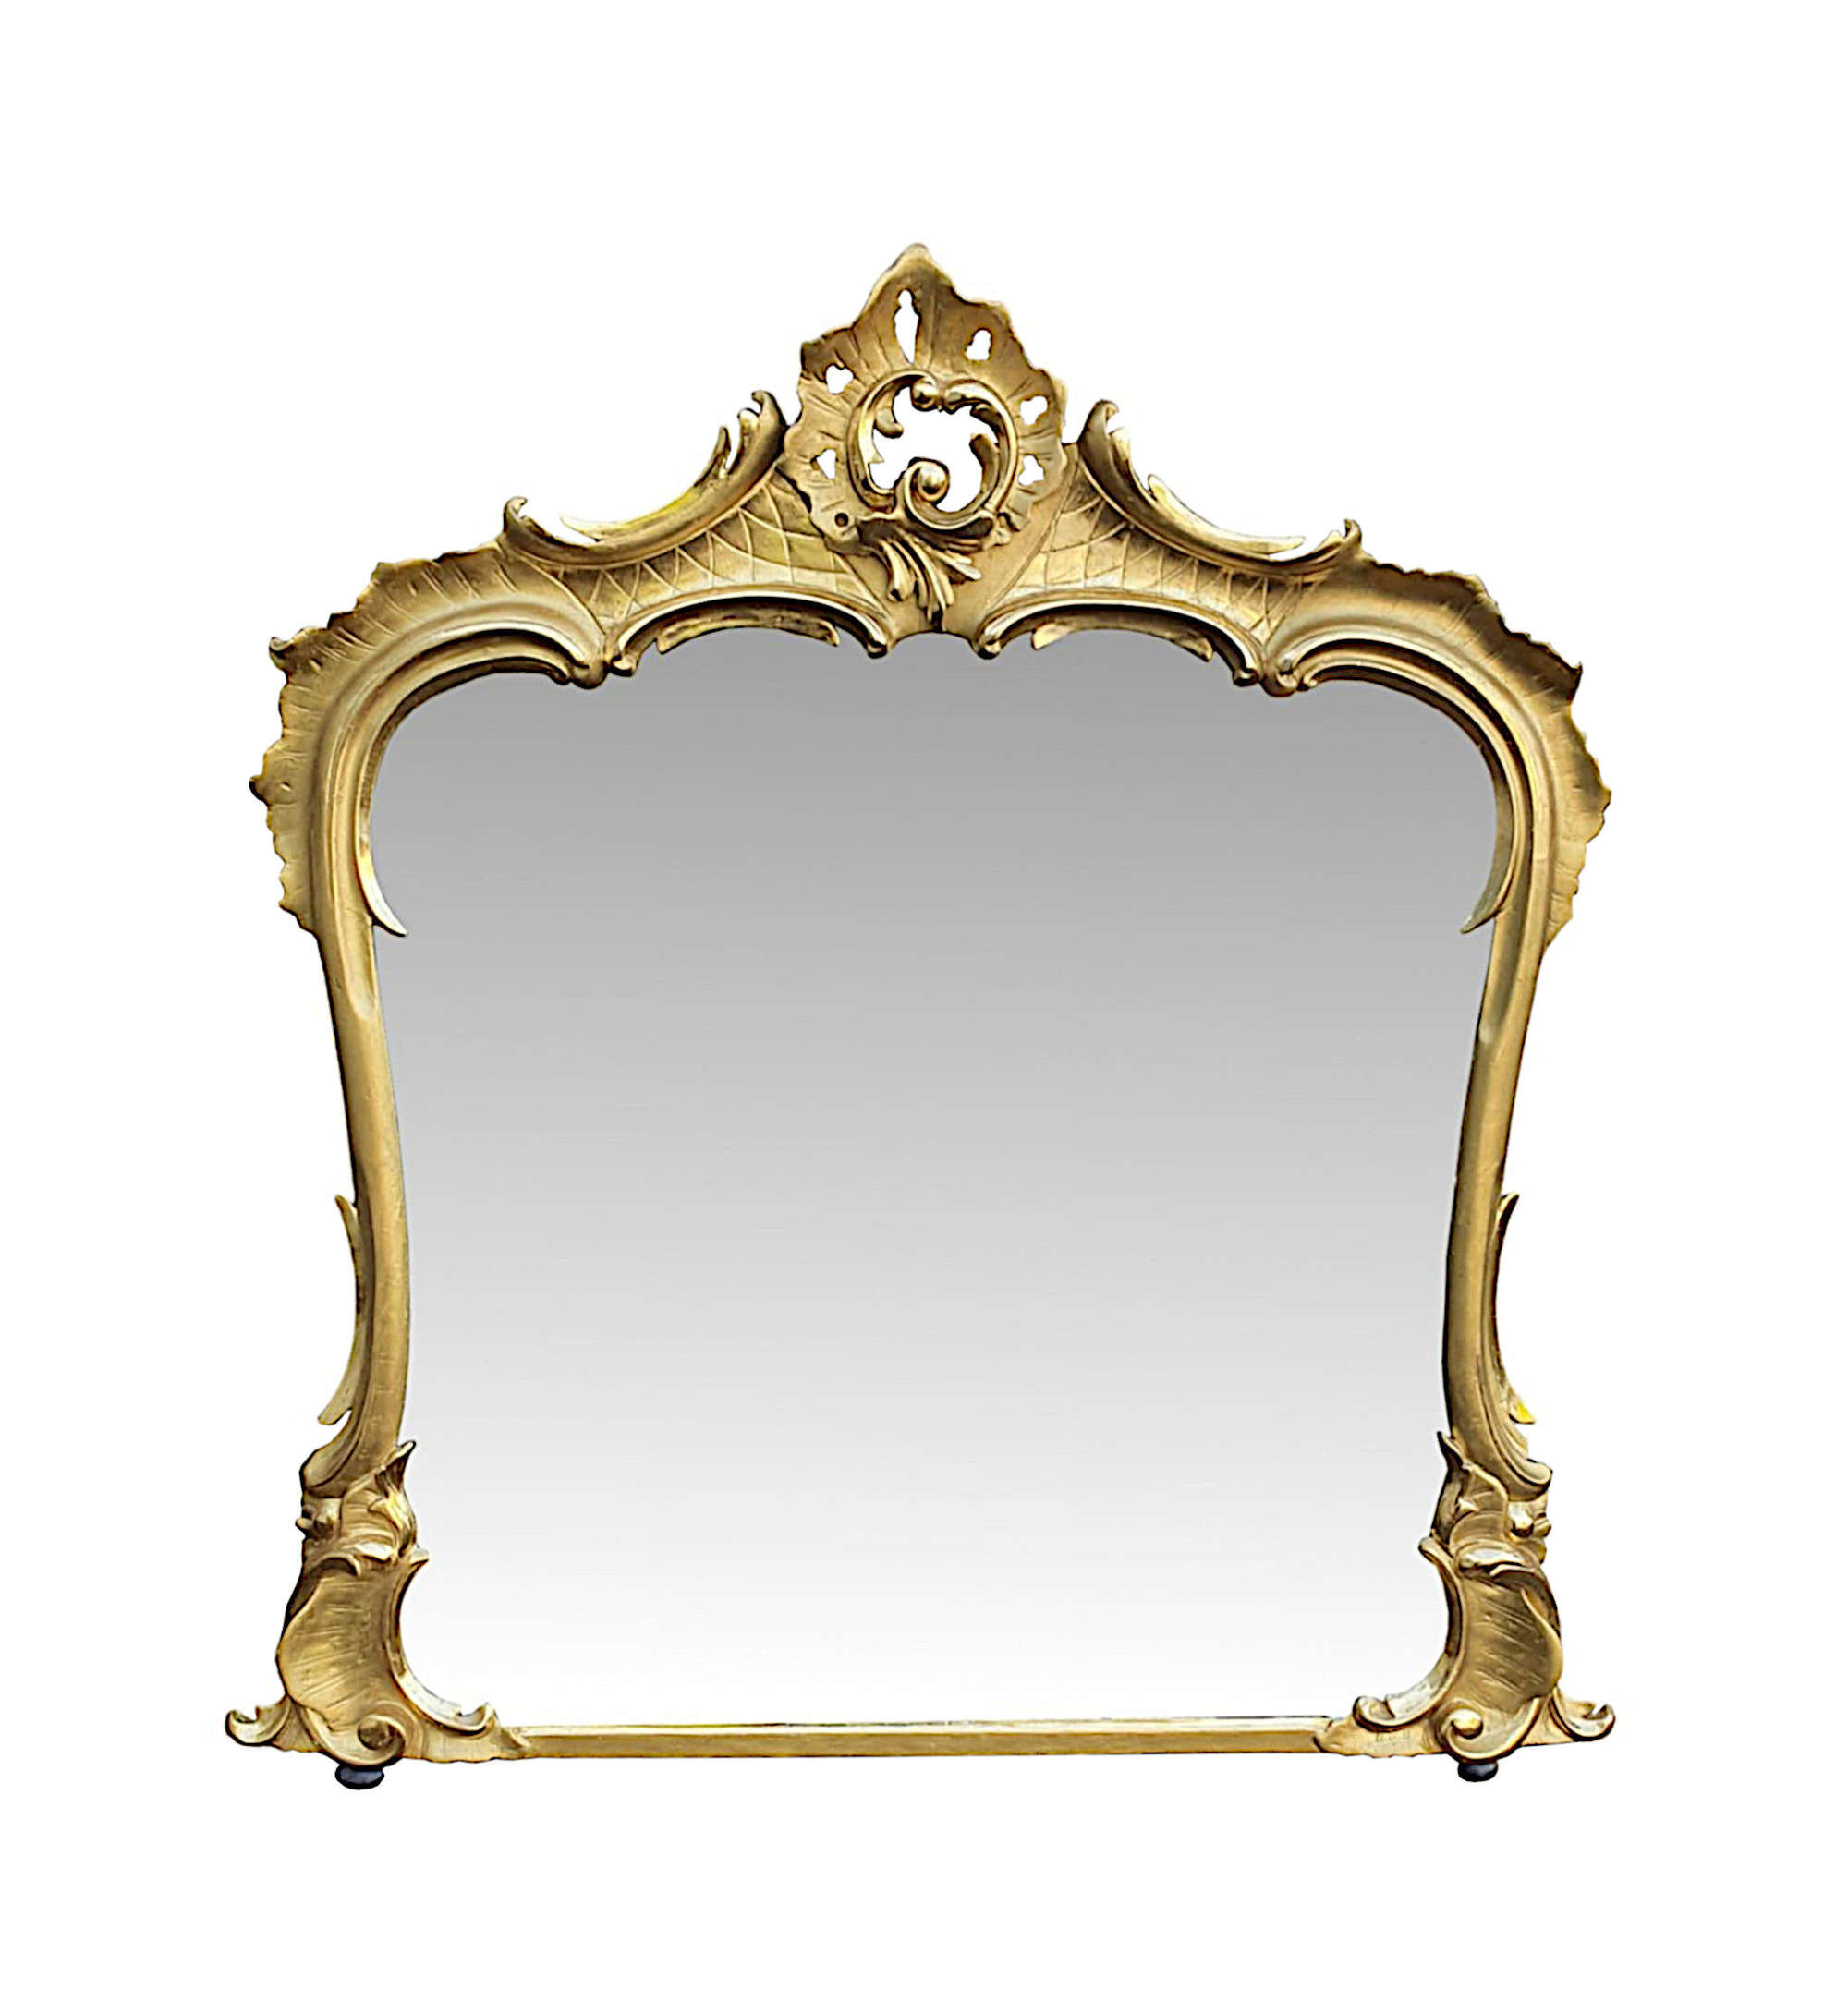 A Superb Large 19th Century Giltwood Antique Overmantle Mirror